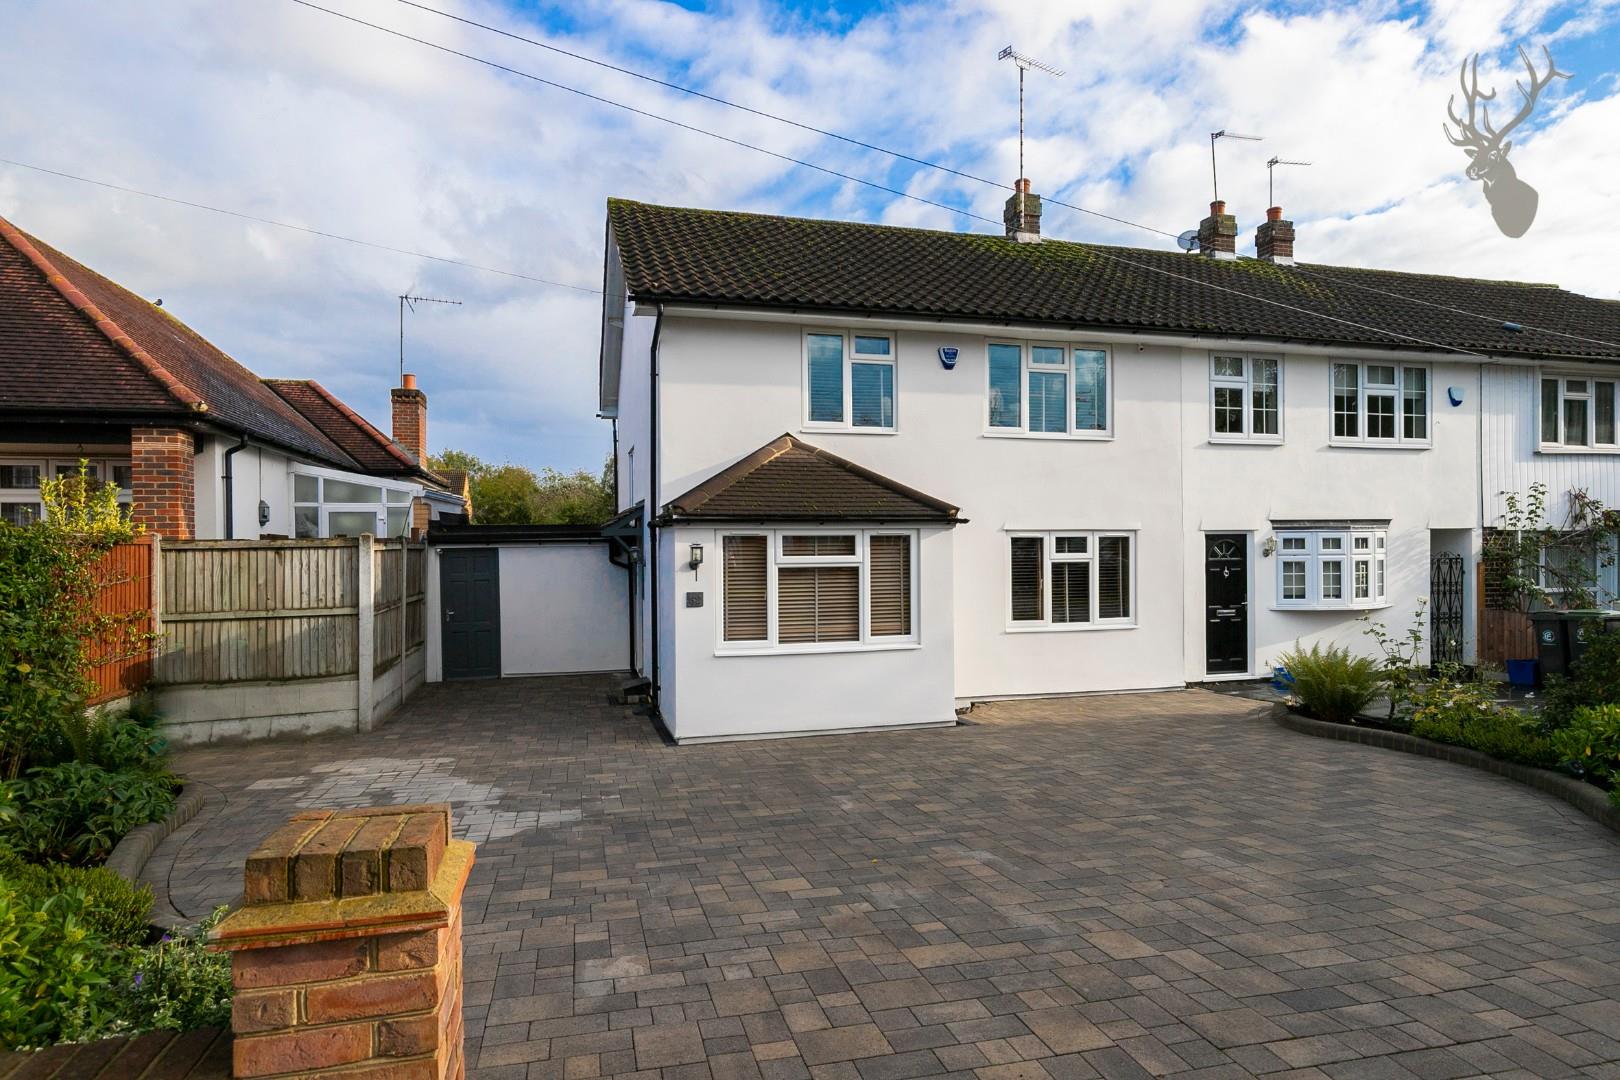 Similar Property: House - End Terrace in Theydon Bois